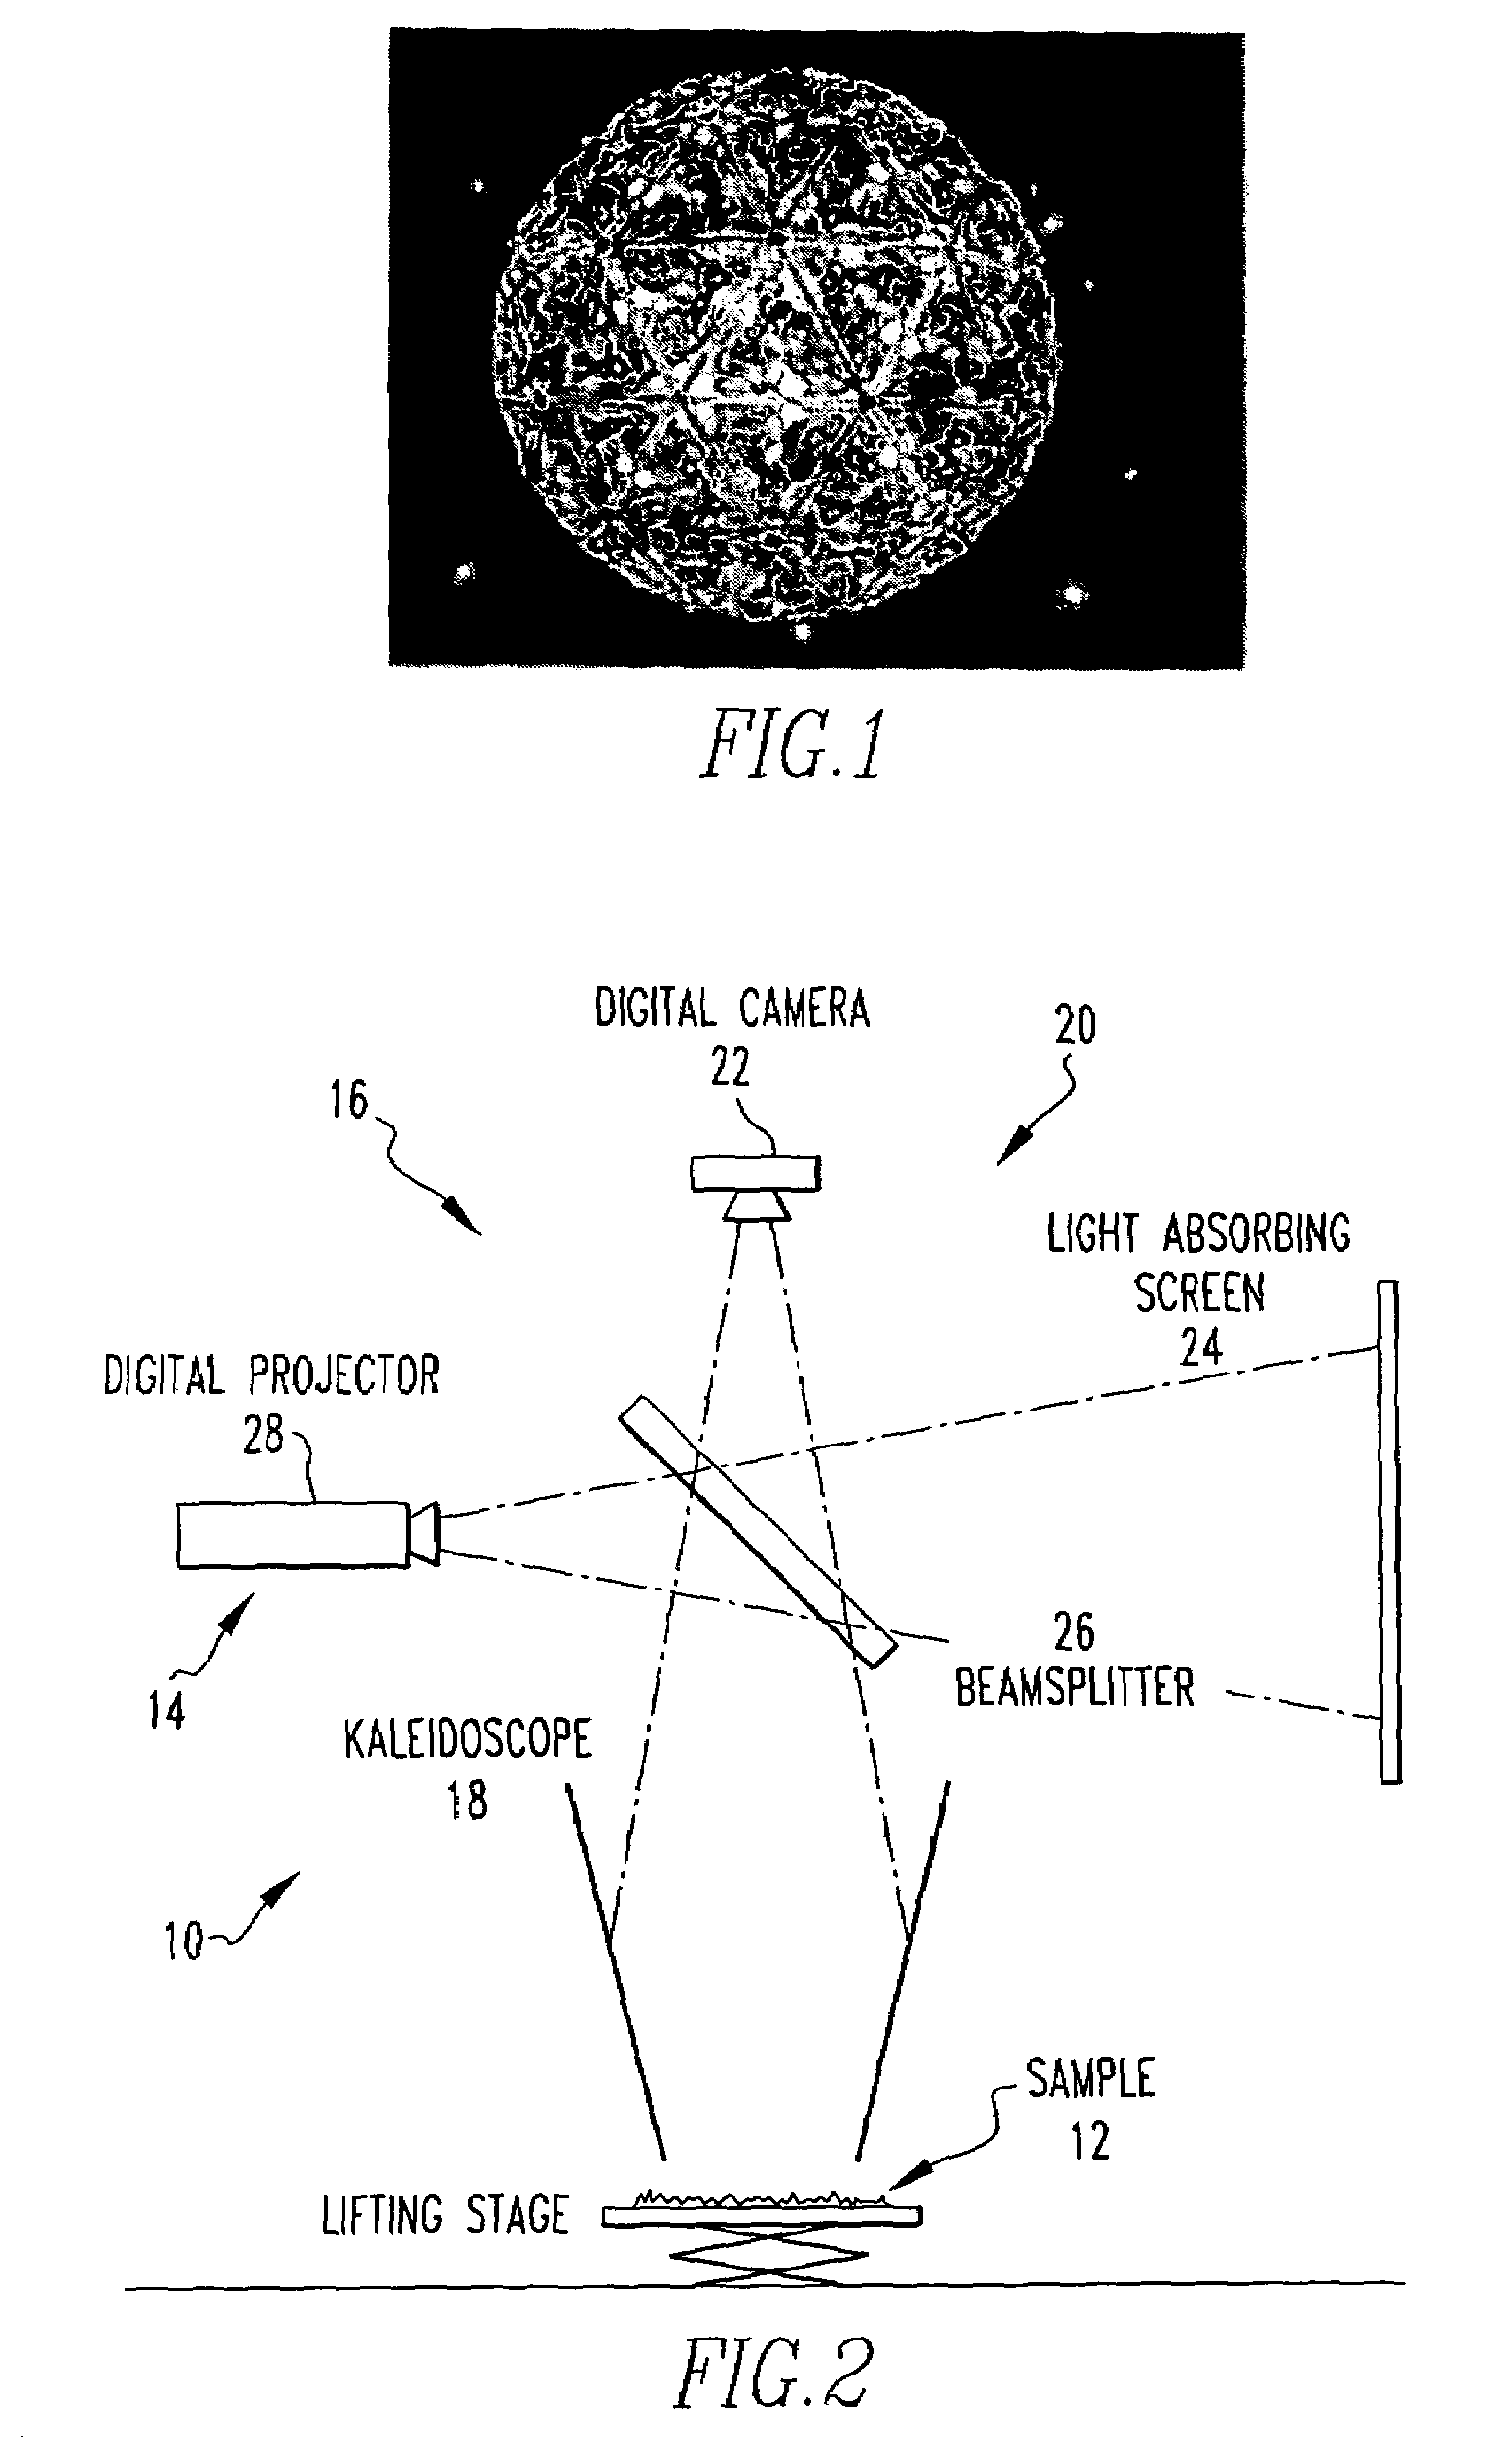 Method and apparatus for determining a bidirectional reflectance distribution function, subsurface scattering or a bidirectional texture function of a subject